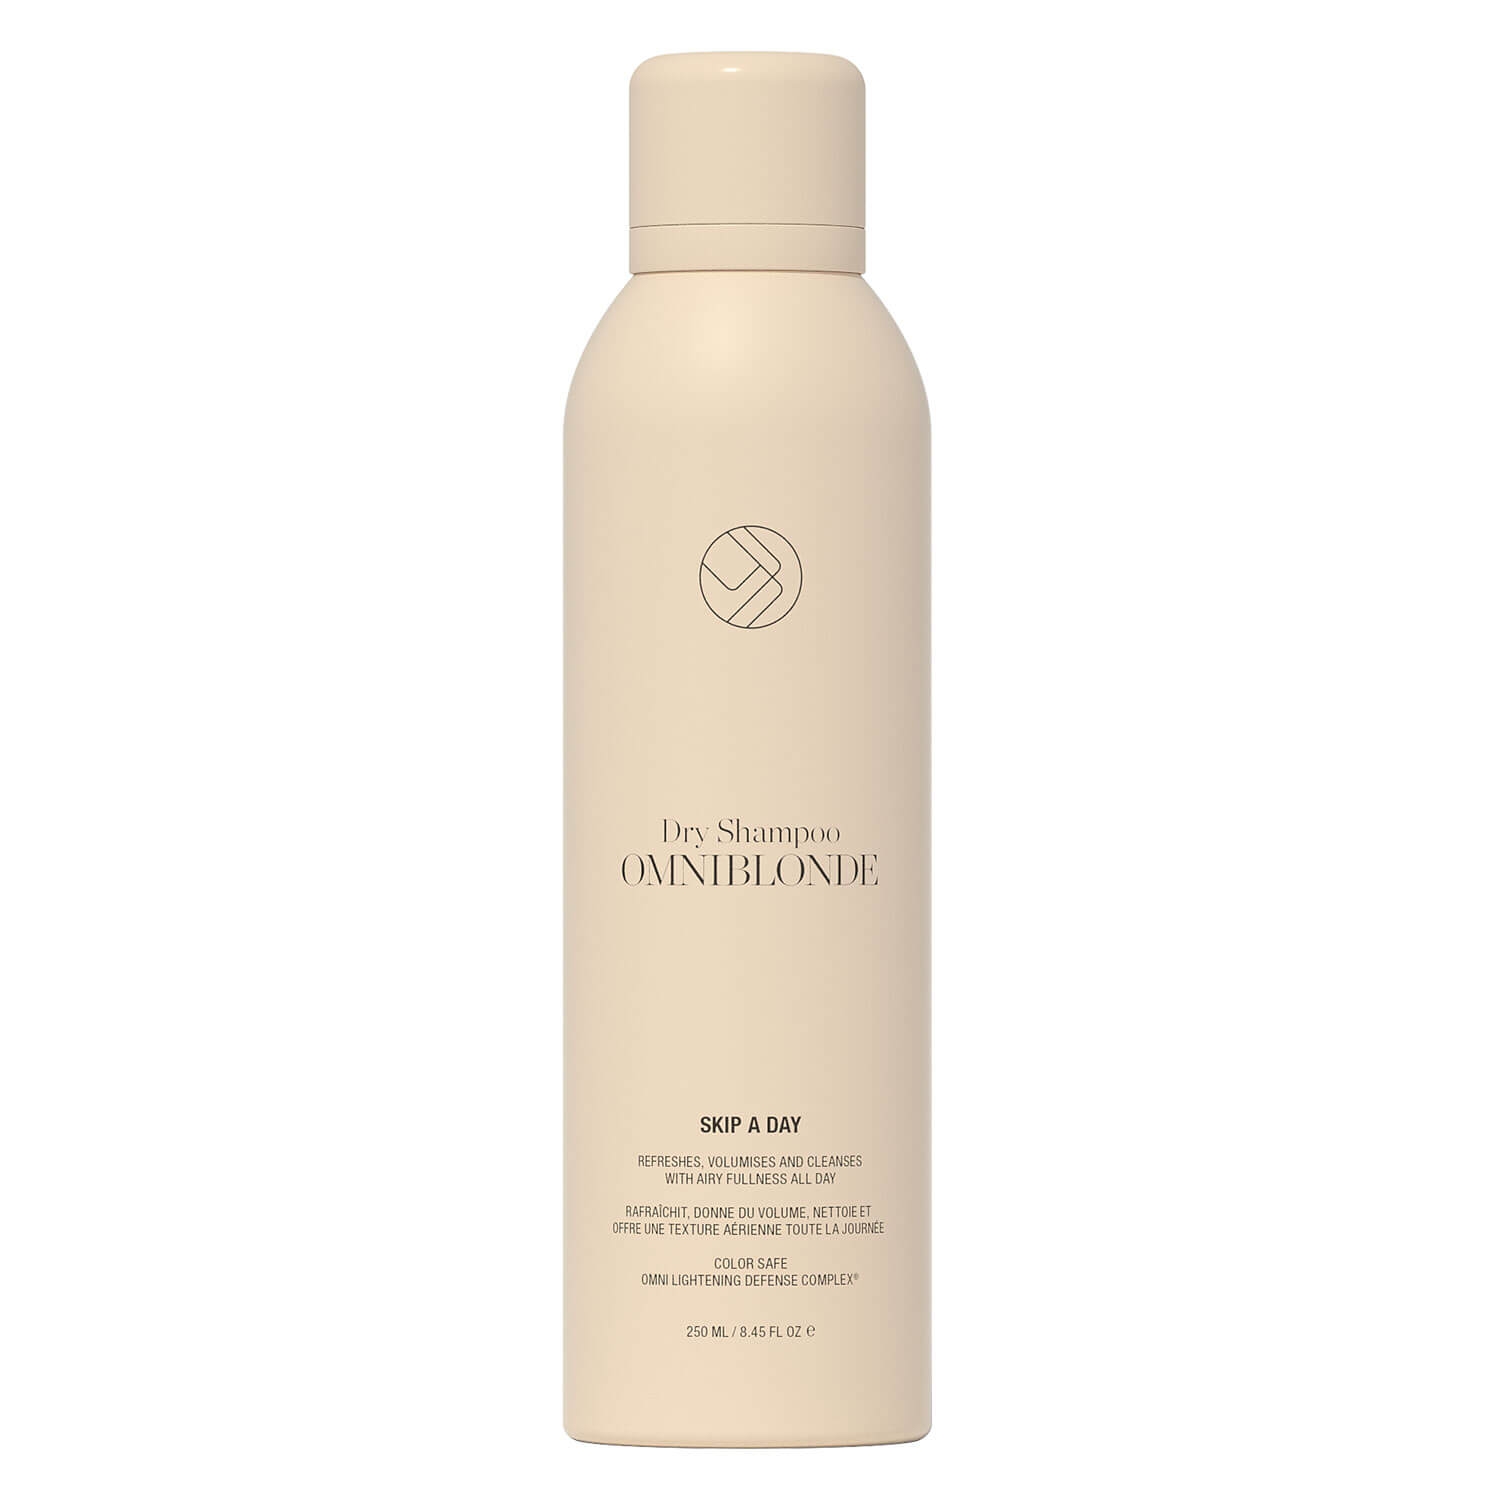 Product image from Omniblonde - Skip A Day Dry Shampoo